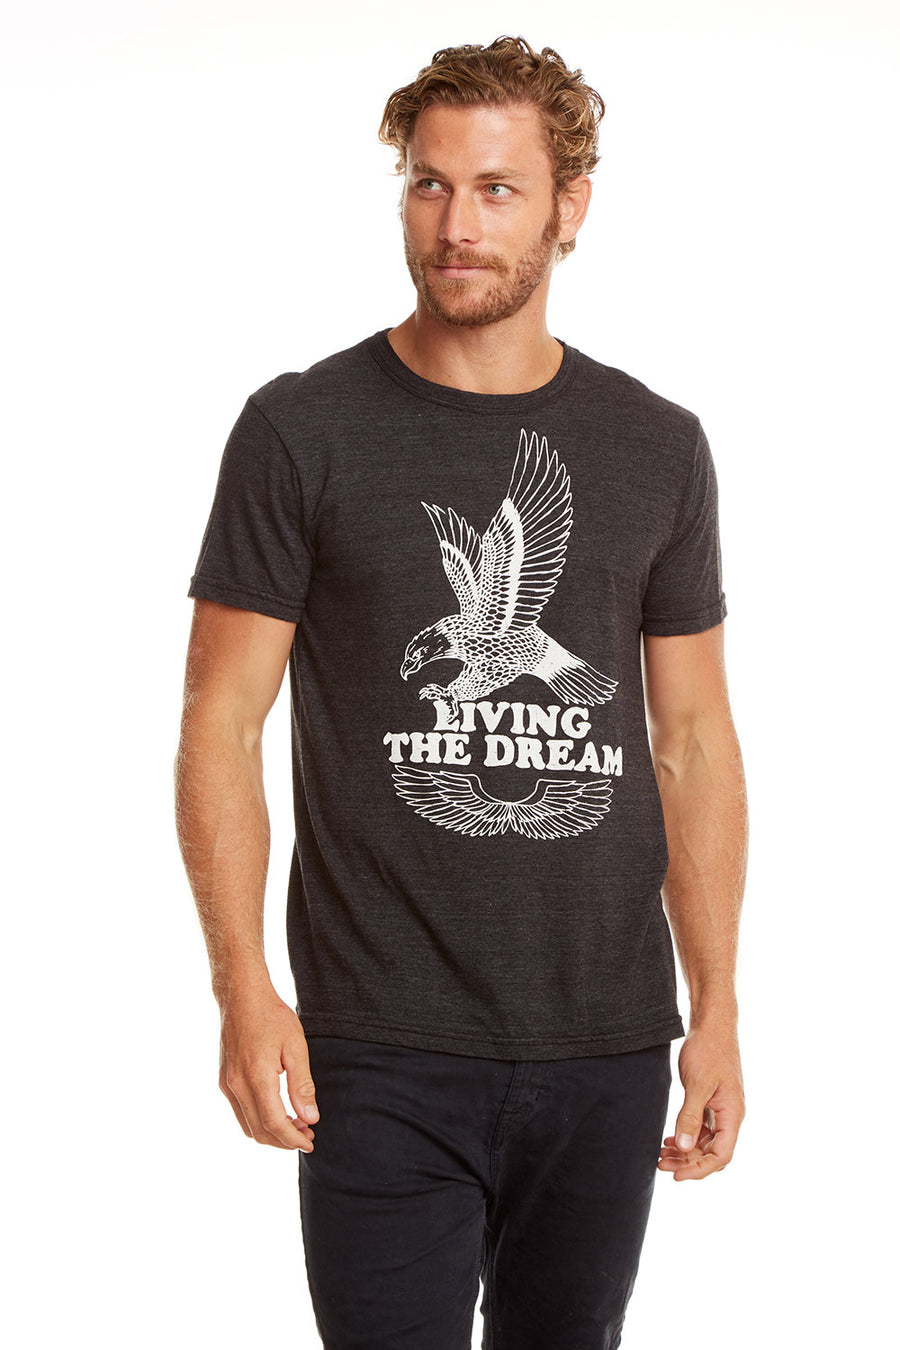 Living The Dream MENS - chaserbrand